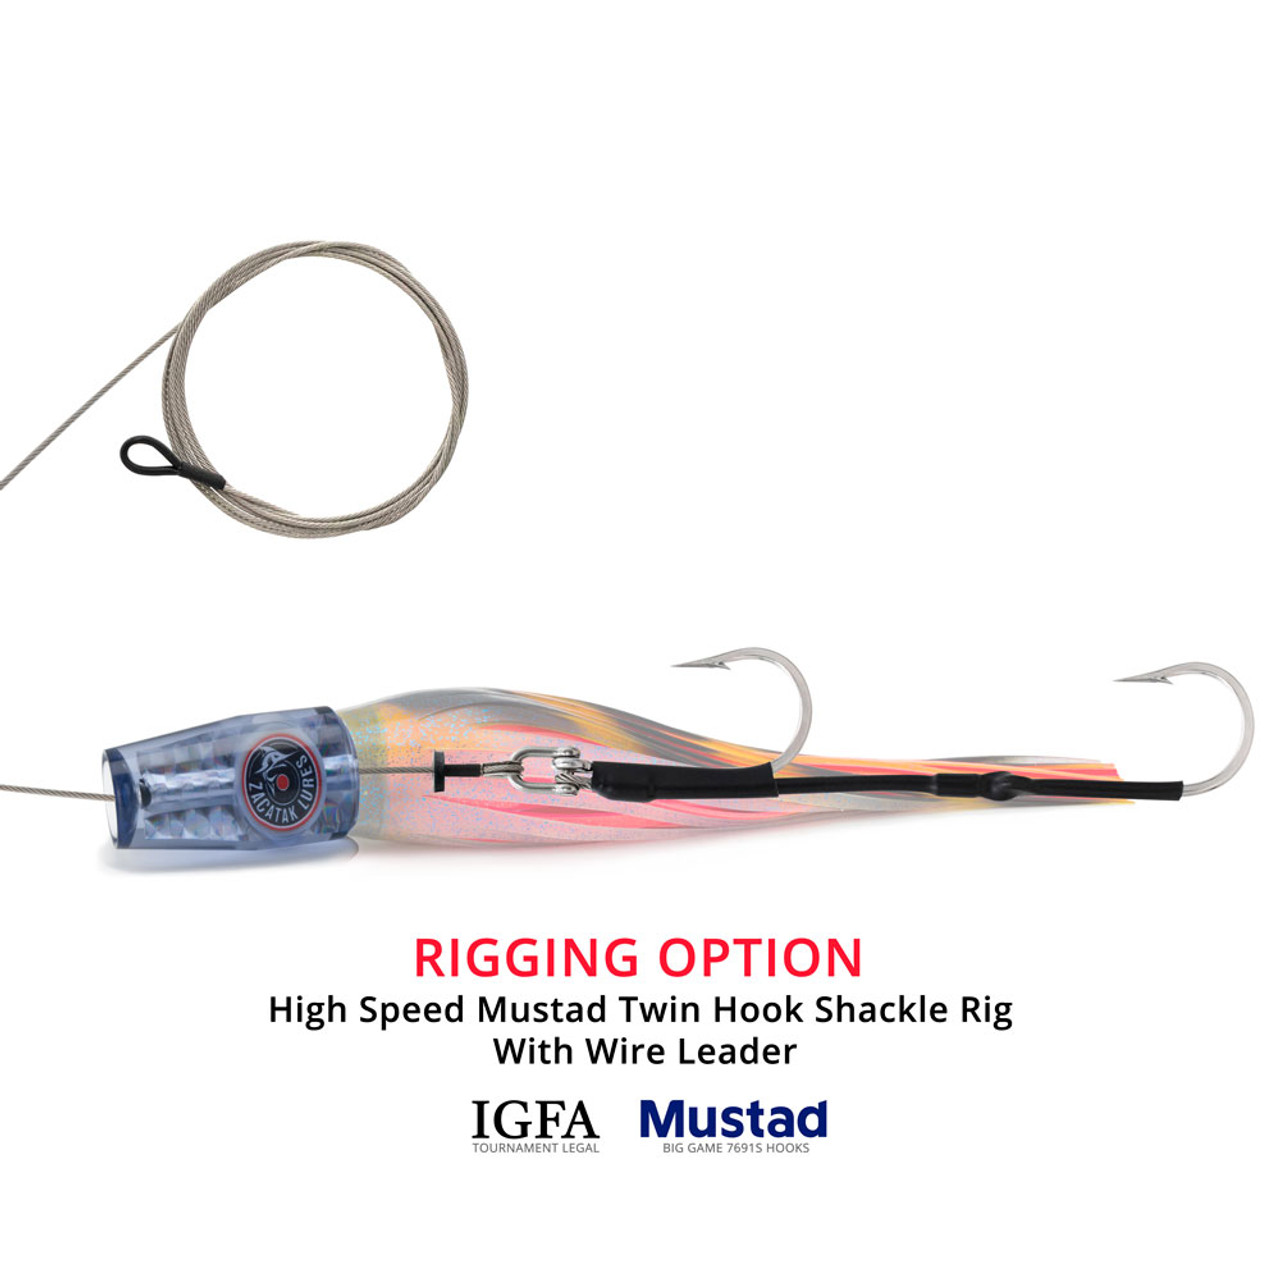 https://cdn11.bigcommerce.com/s-sv4r4mic/images/stencil/1280x1280/products/9069/49292/zacatak-lures-high-speed-rigging-option-twin-hook-shackle-rig-smoka__23962.1671433934.jpg?c=2?imbypass=on